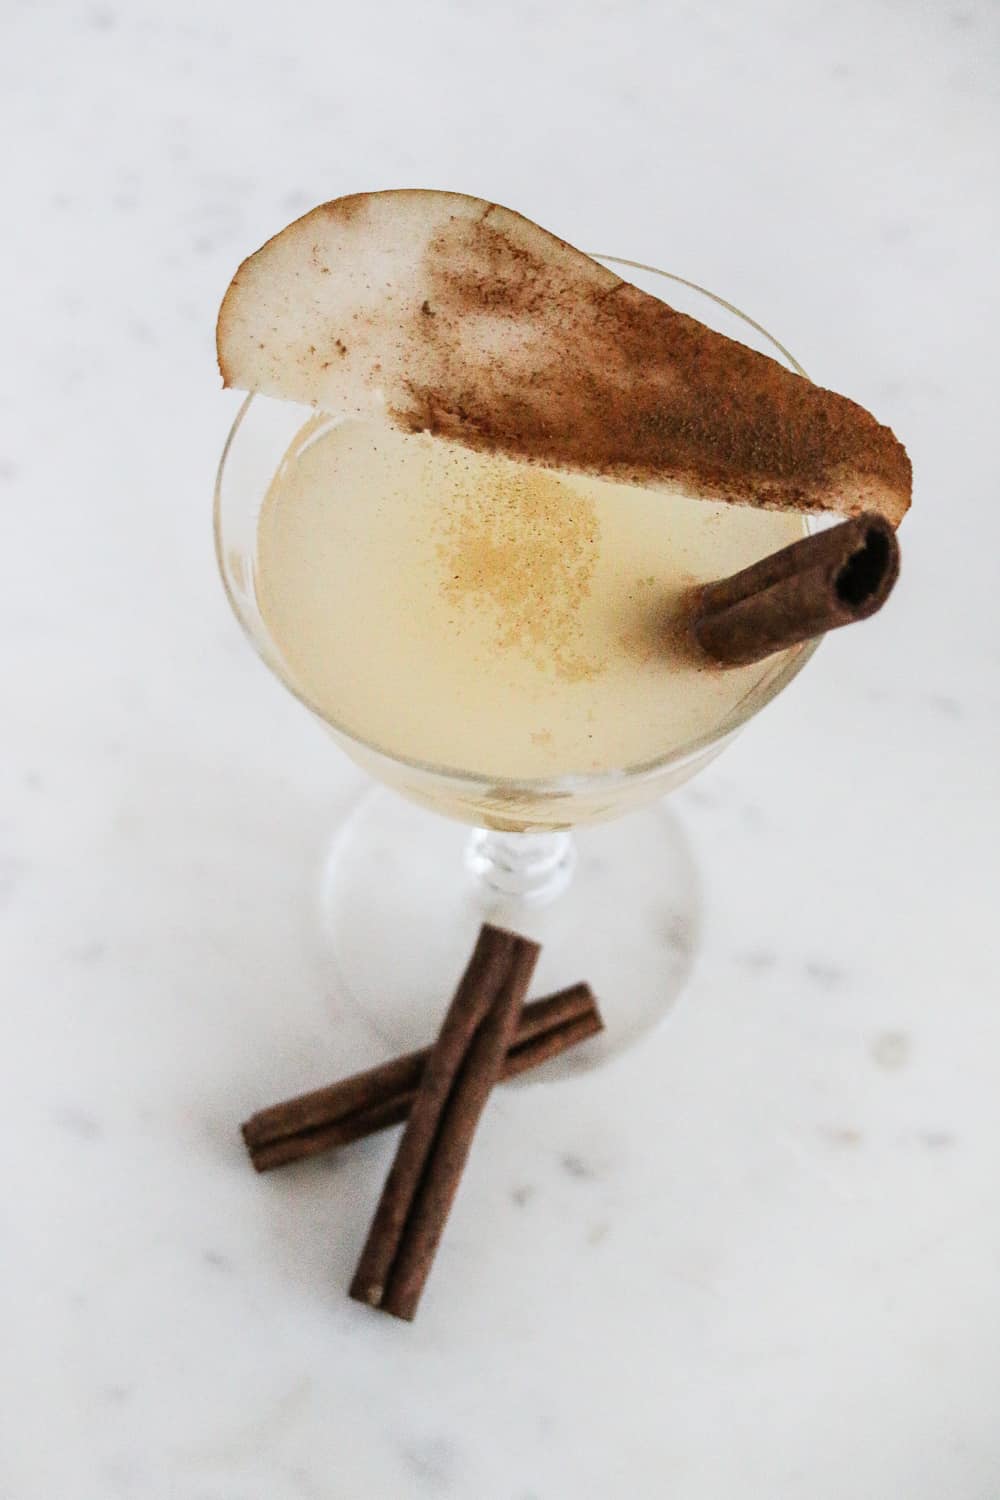 partridge in a pear tree cocktail